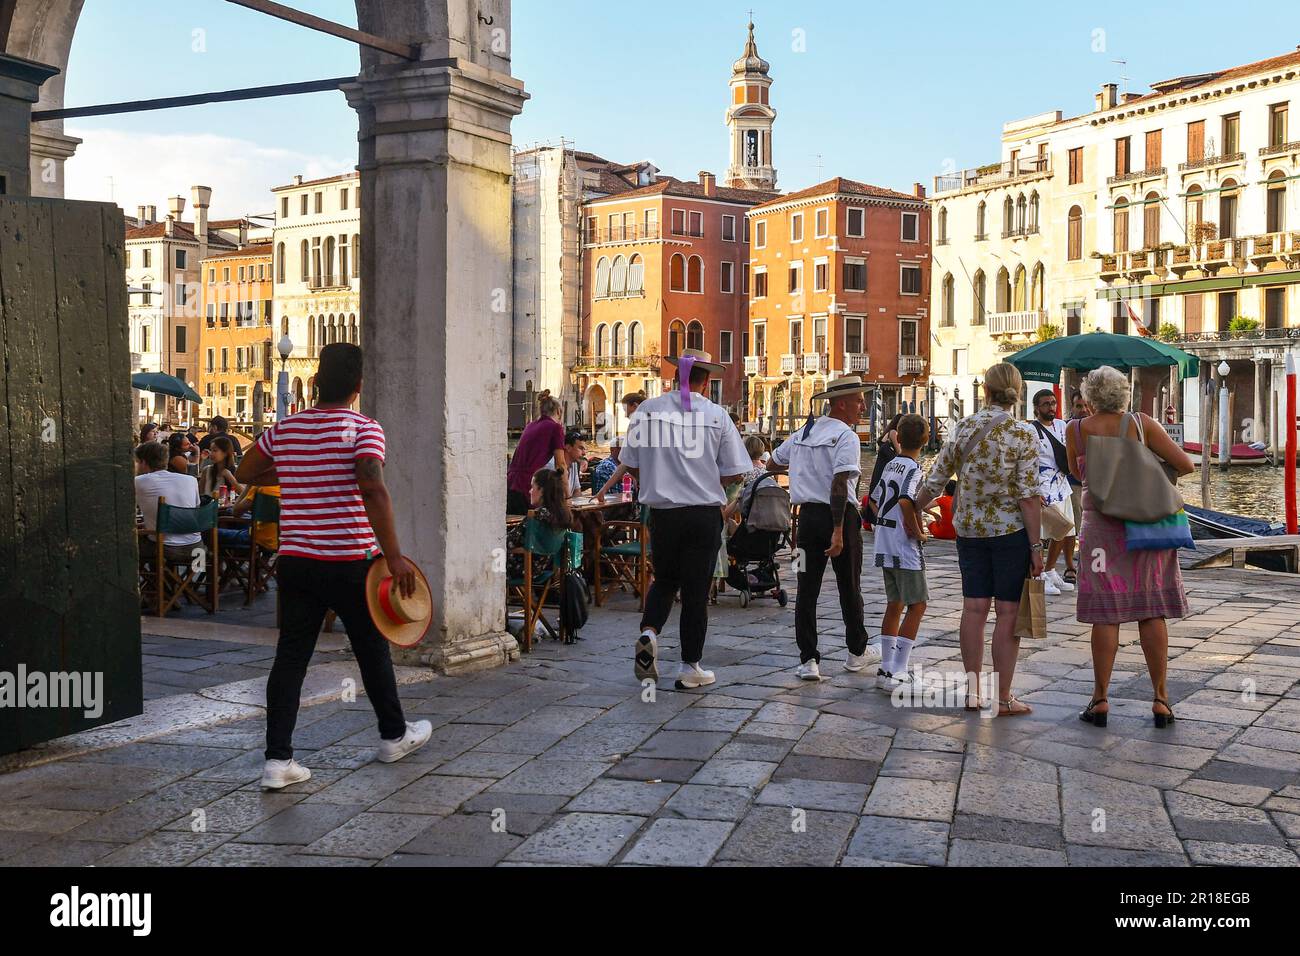 Gondoliers arrive to work in Campo dell'Erbaria, square overlooking the Grand Canal during the crowded evening happy hour, Venice, Veneto, Italy Stock Photo